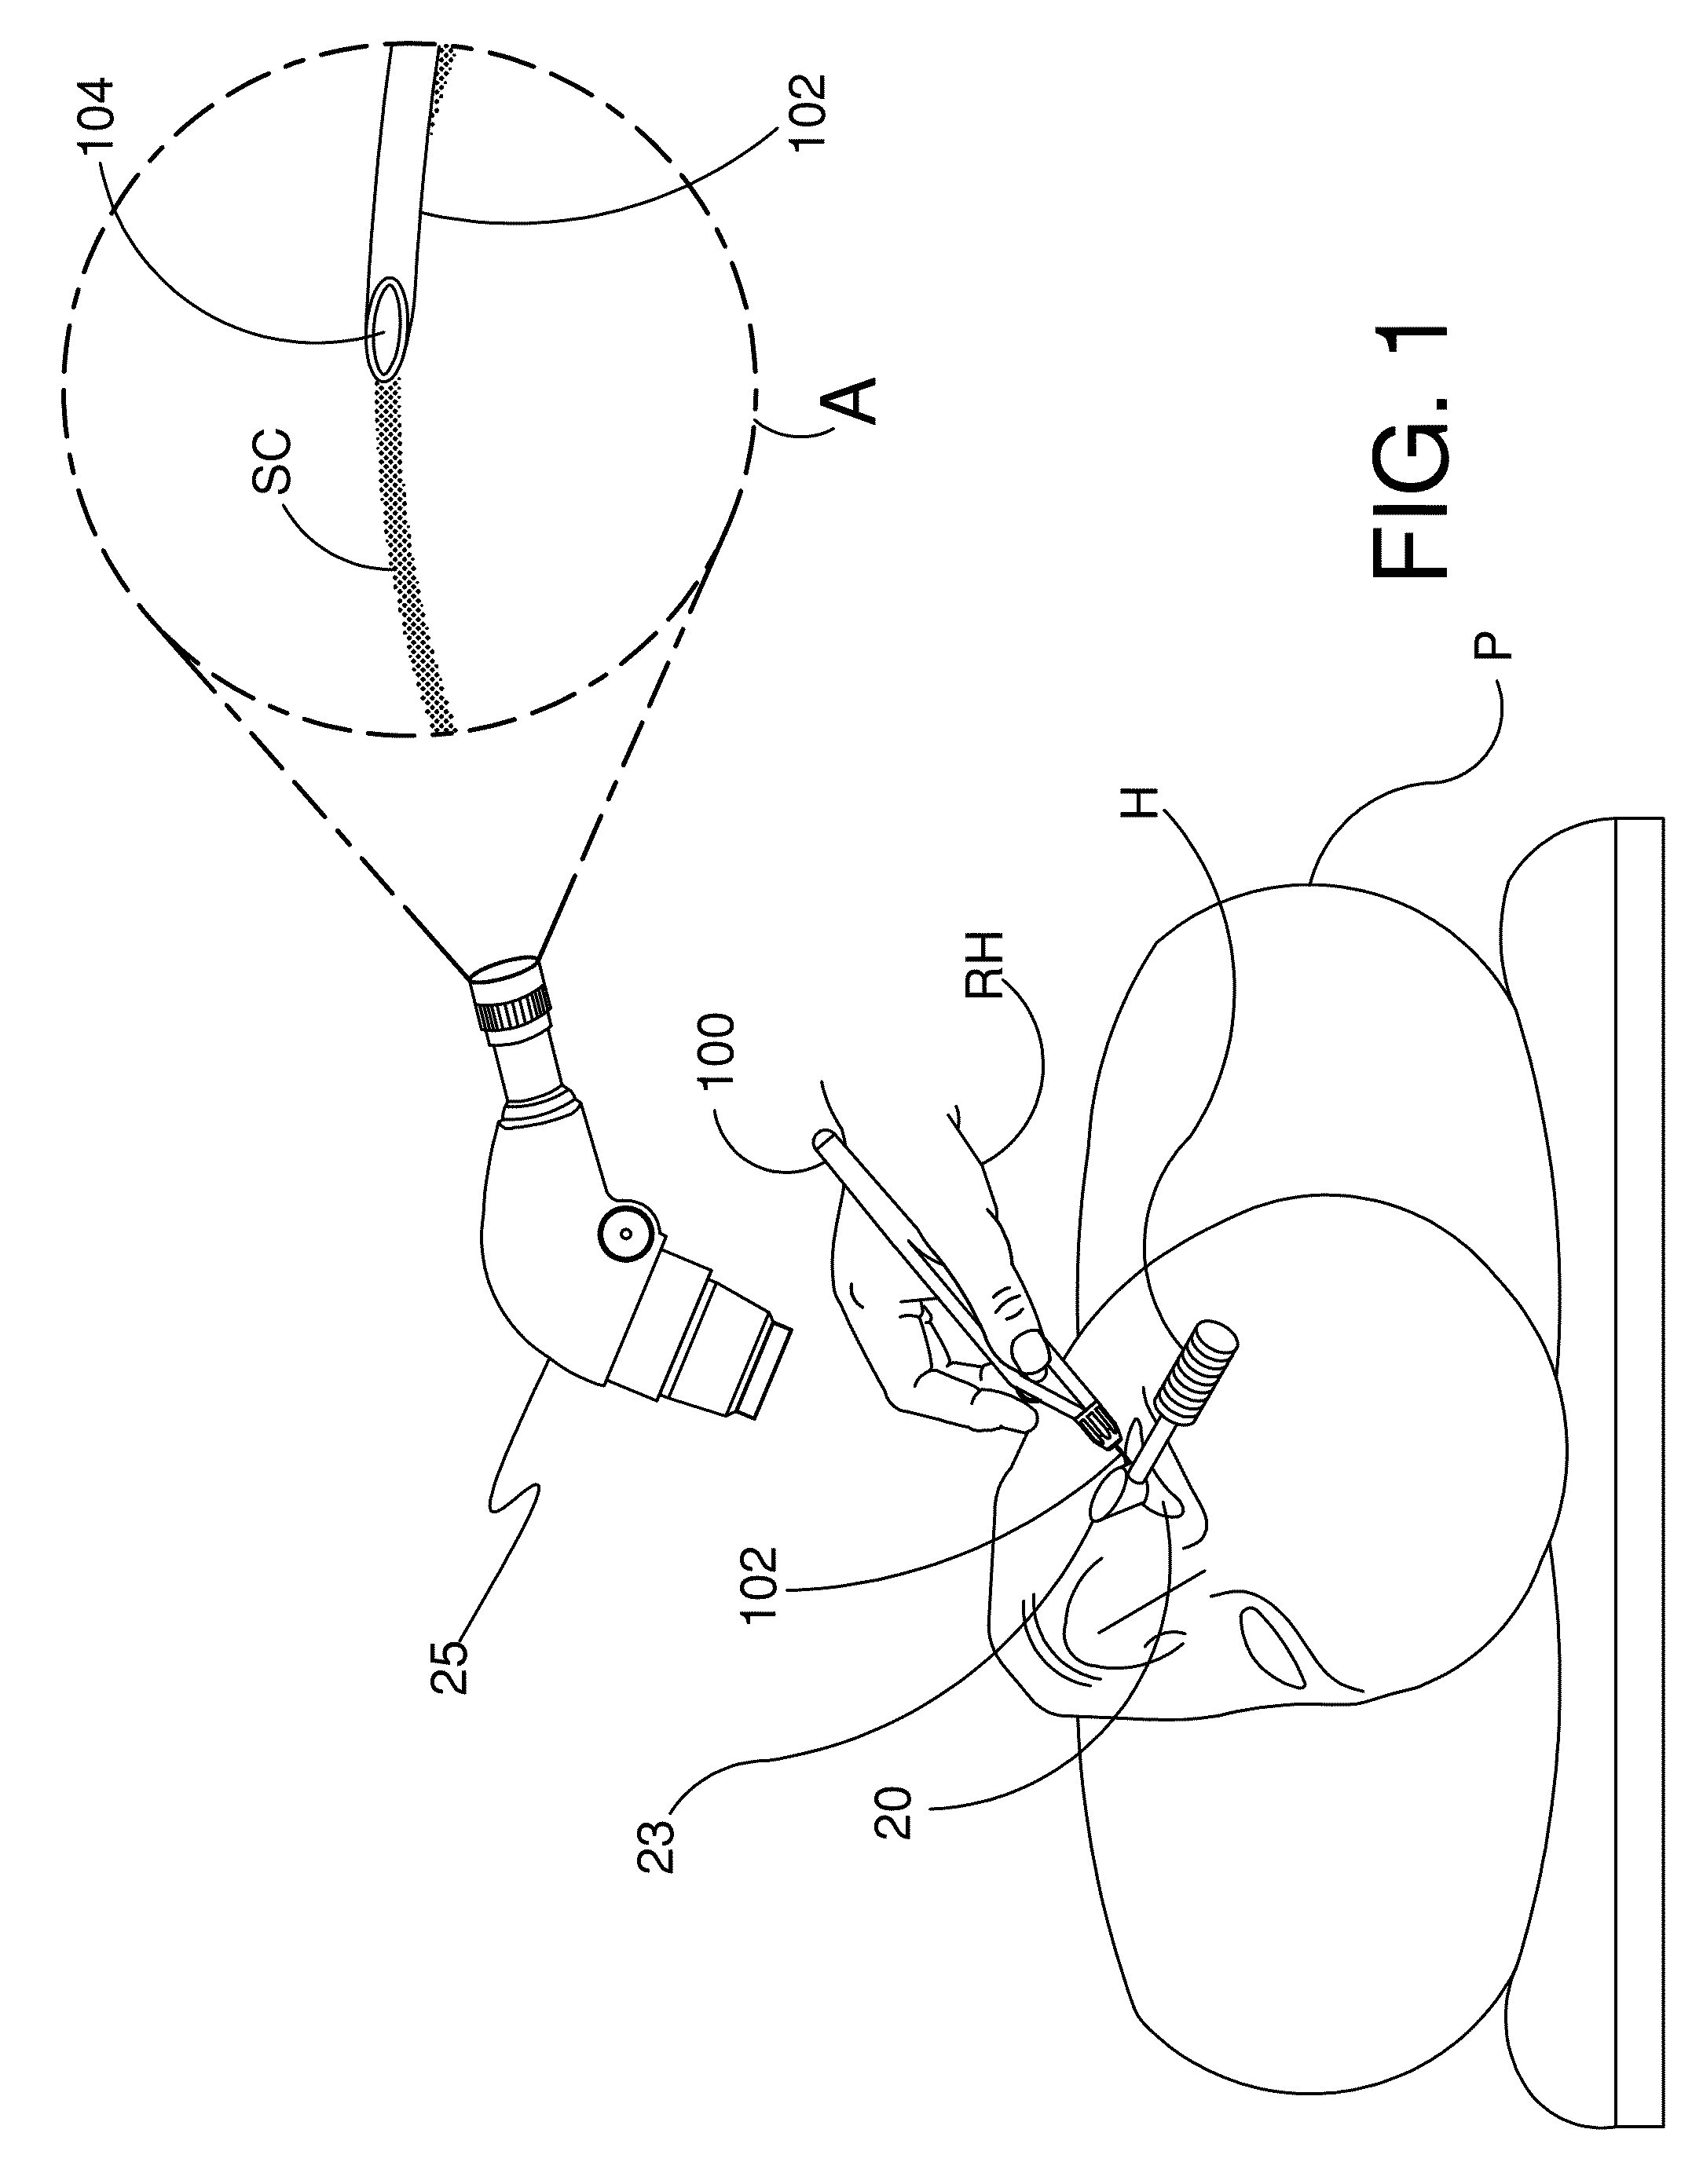 Ocular implants and methods for delivering ocular implants into the eye